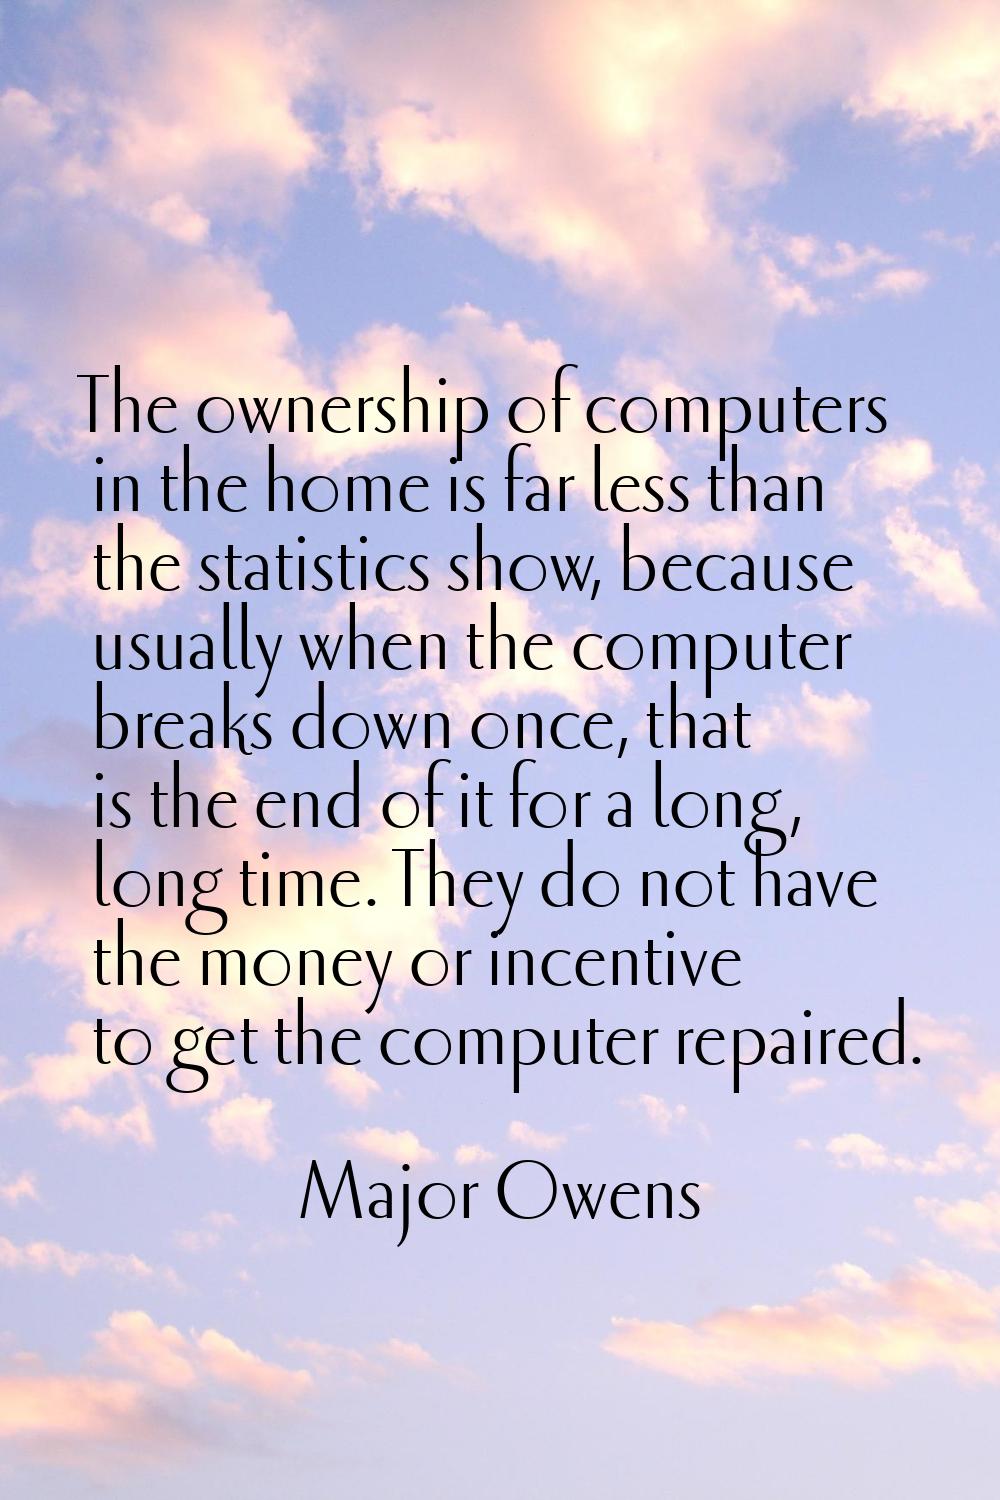 The ownership of computers in the home is far less than the statistics show, because usually when t